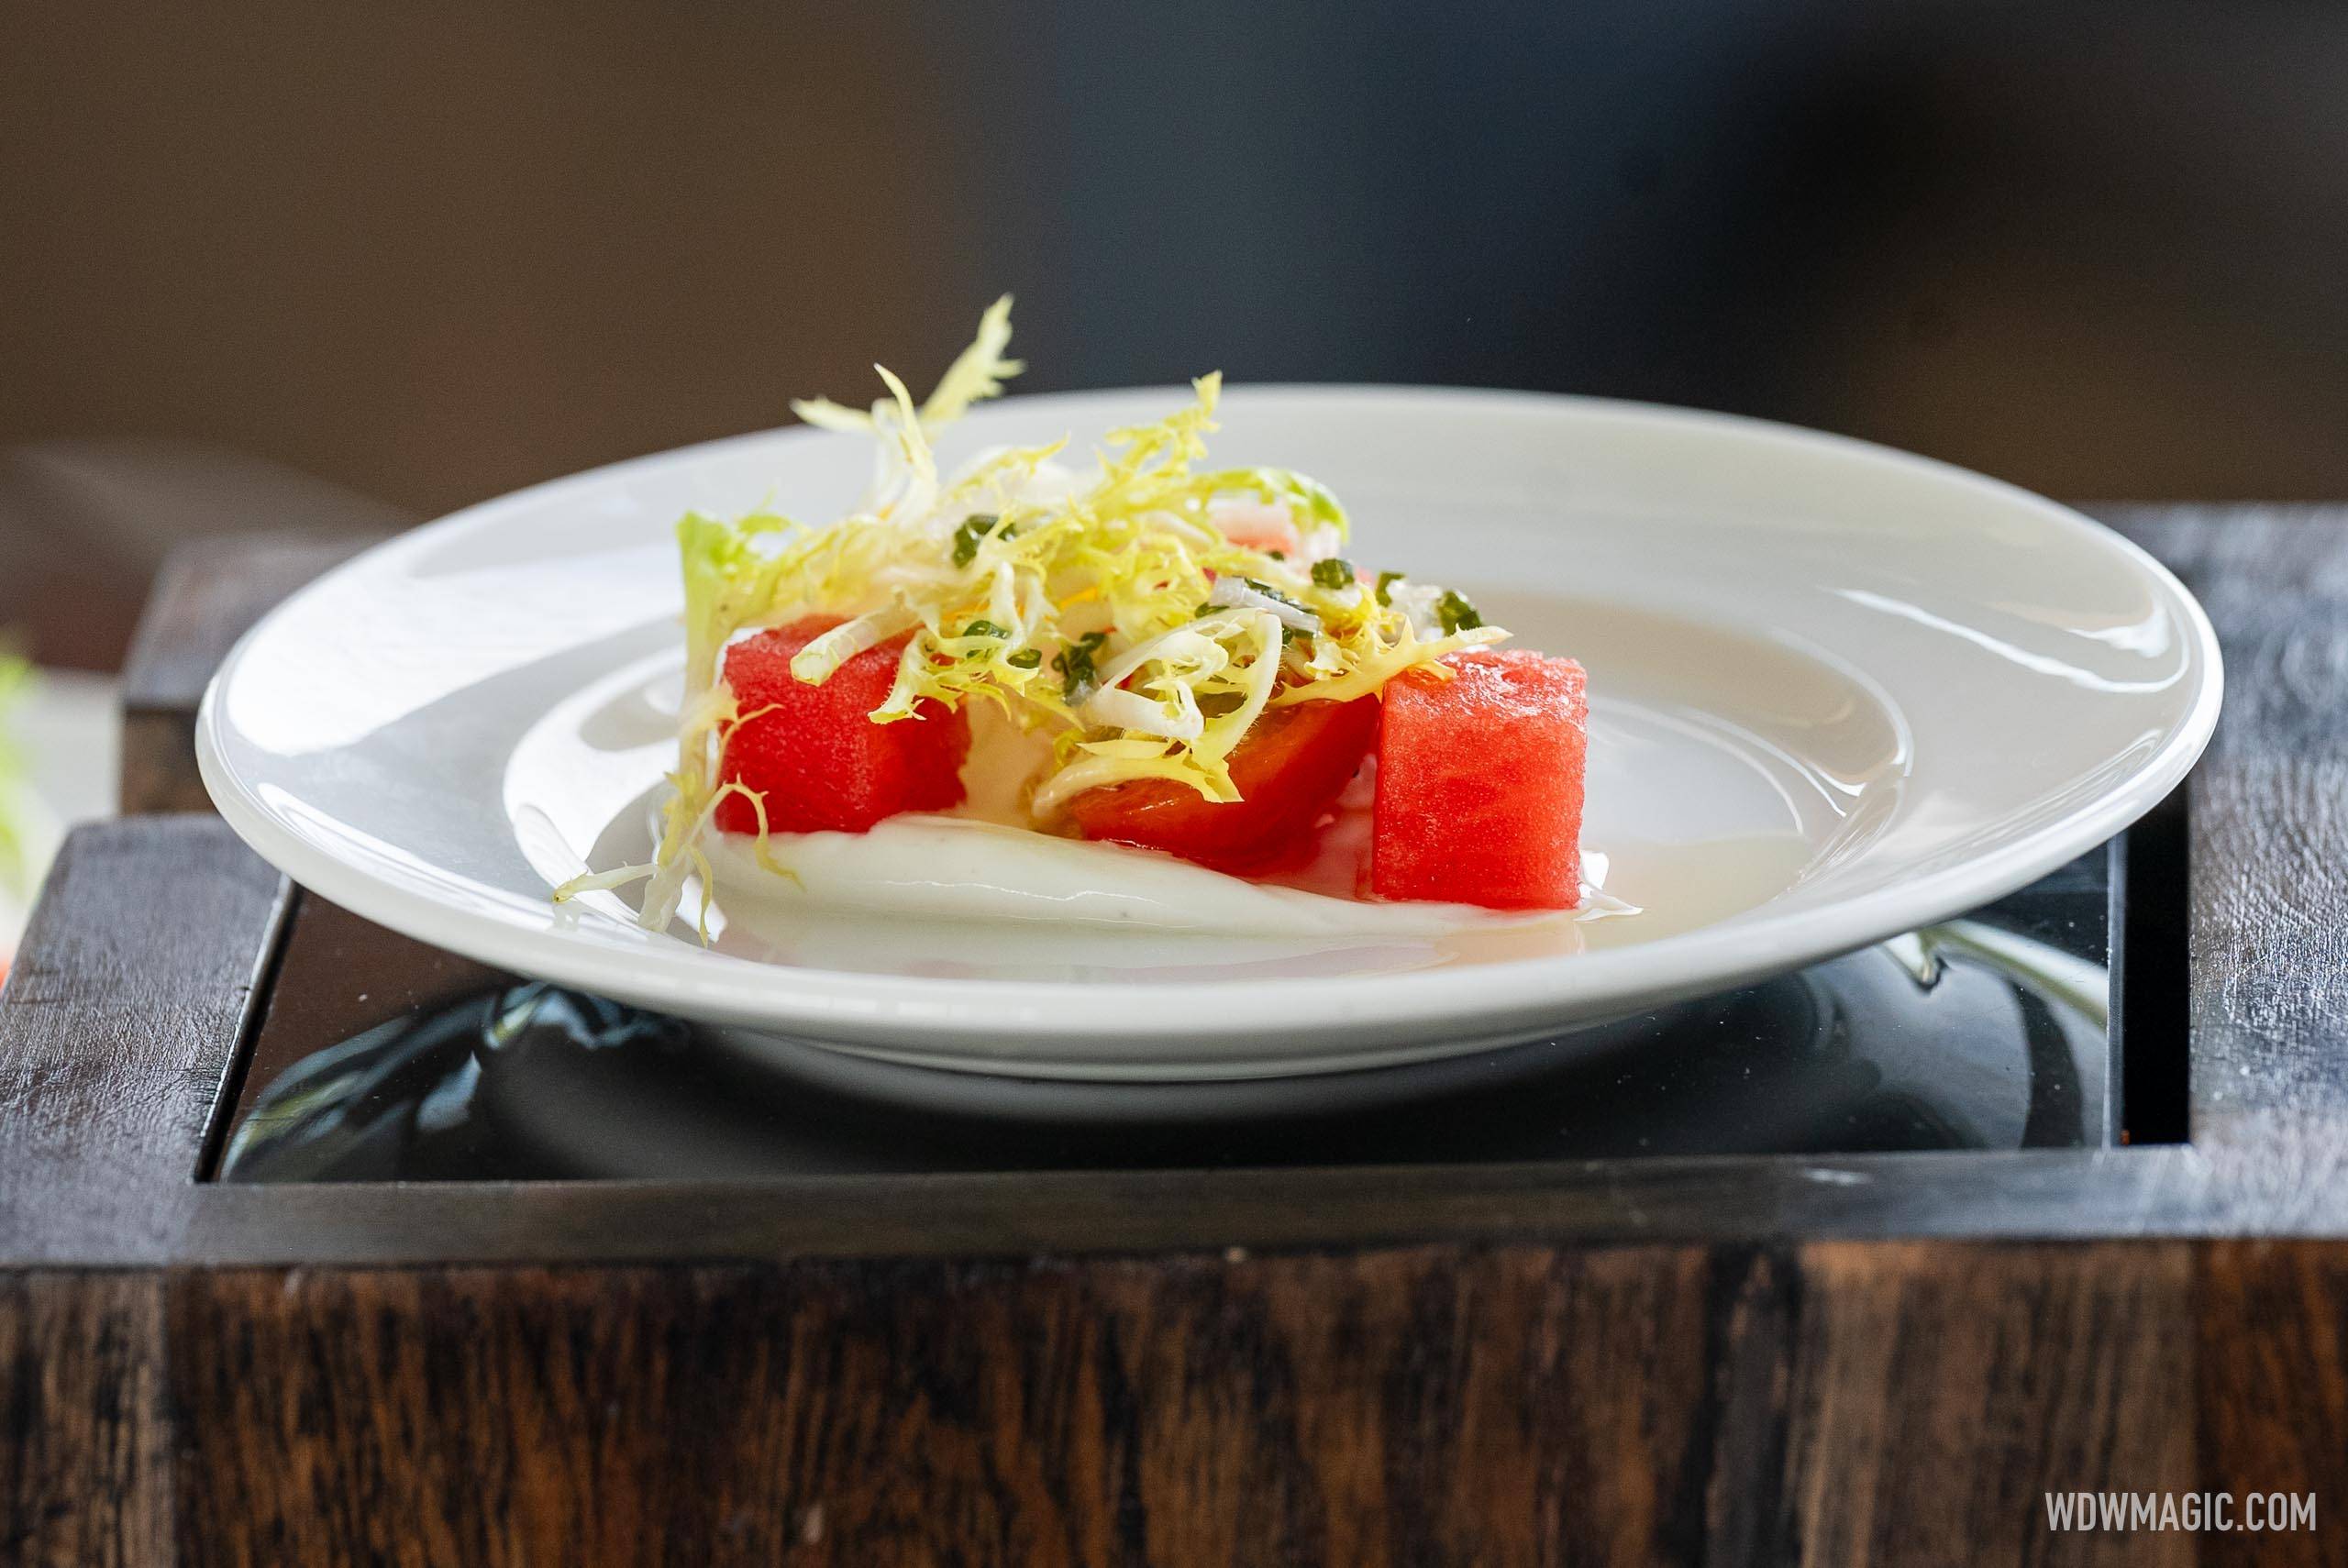 Compressed Late Harvest Watermelon with Spiced Labneh, Marinated Tomatoes, Frisée, Marinated Feta Cheese (from Cabana Bar & Beach Club)